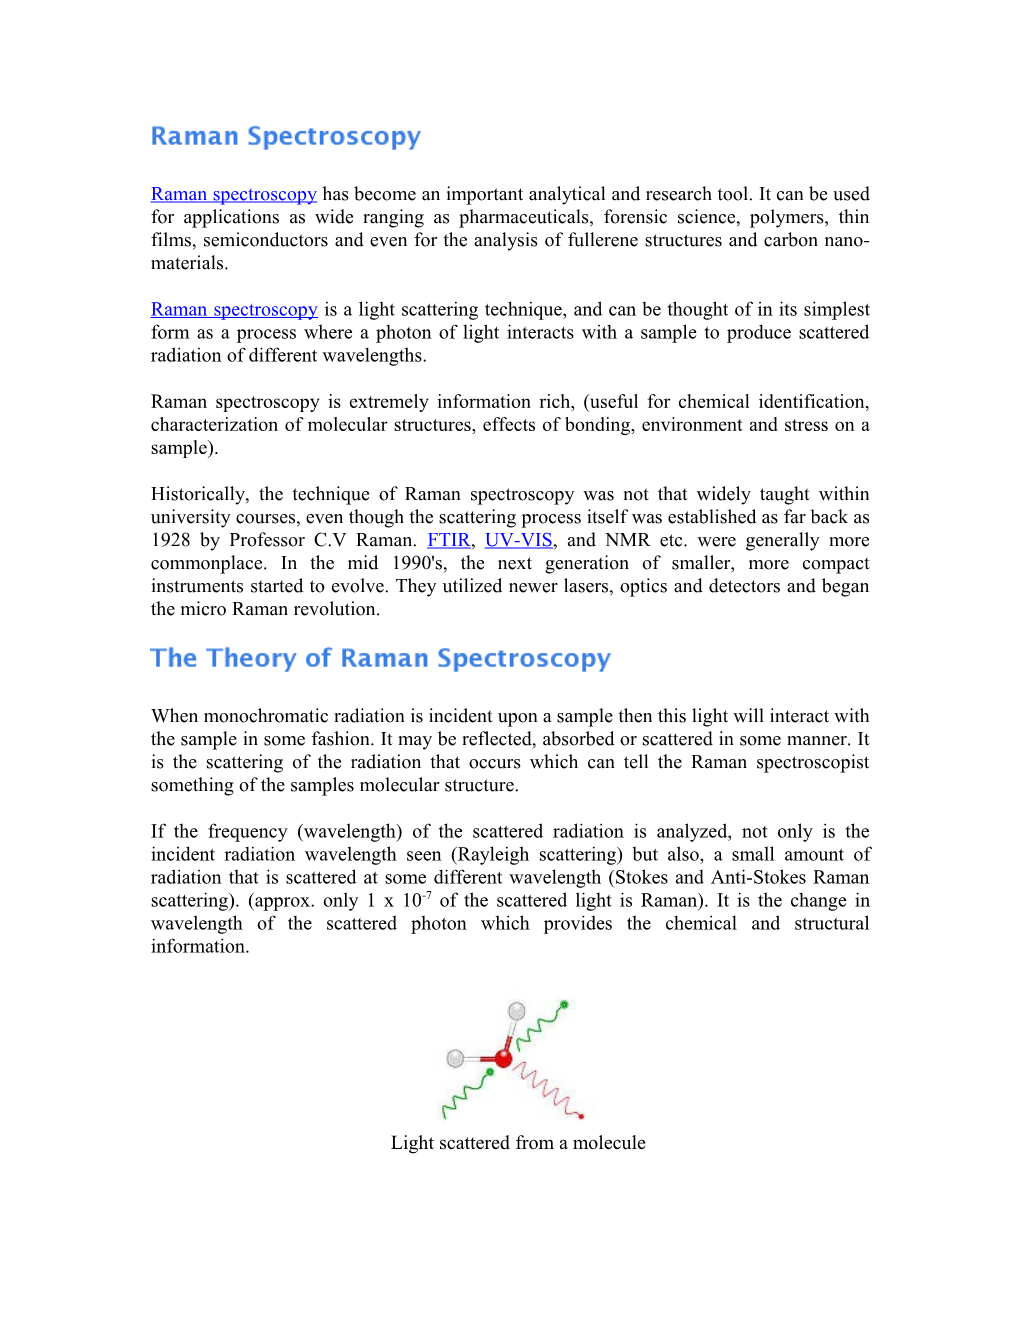 Raman Spectroscopy Has Become an Important Analytical and Research Tool. It Can Be Used